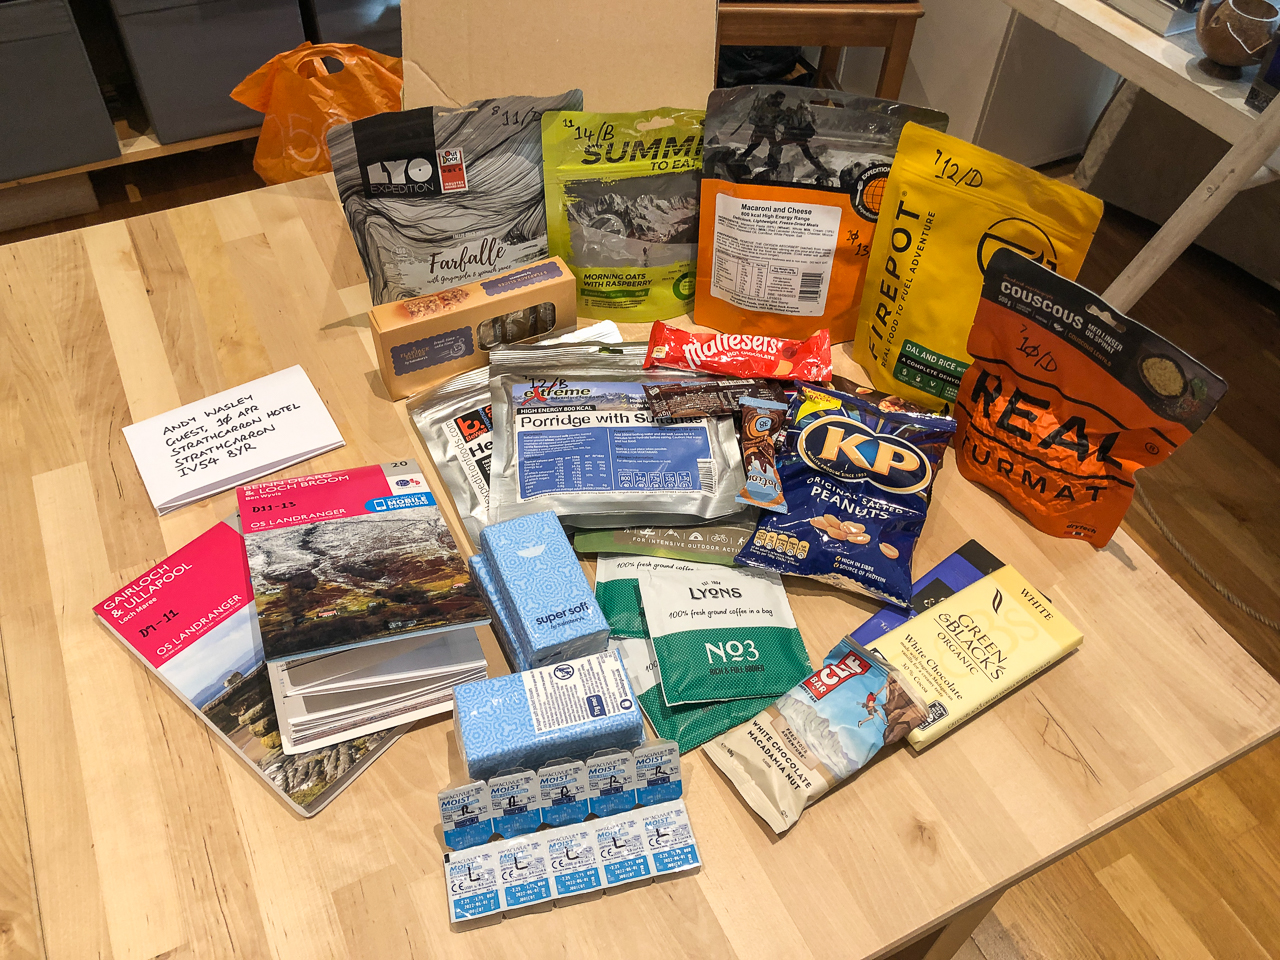 A rations parcel prepared for the Cape Wrath Trail, including a mixture of high-energy food, dehydrated meals and essentials.